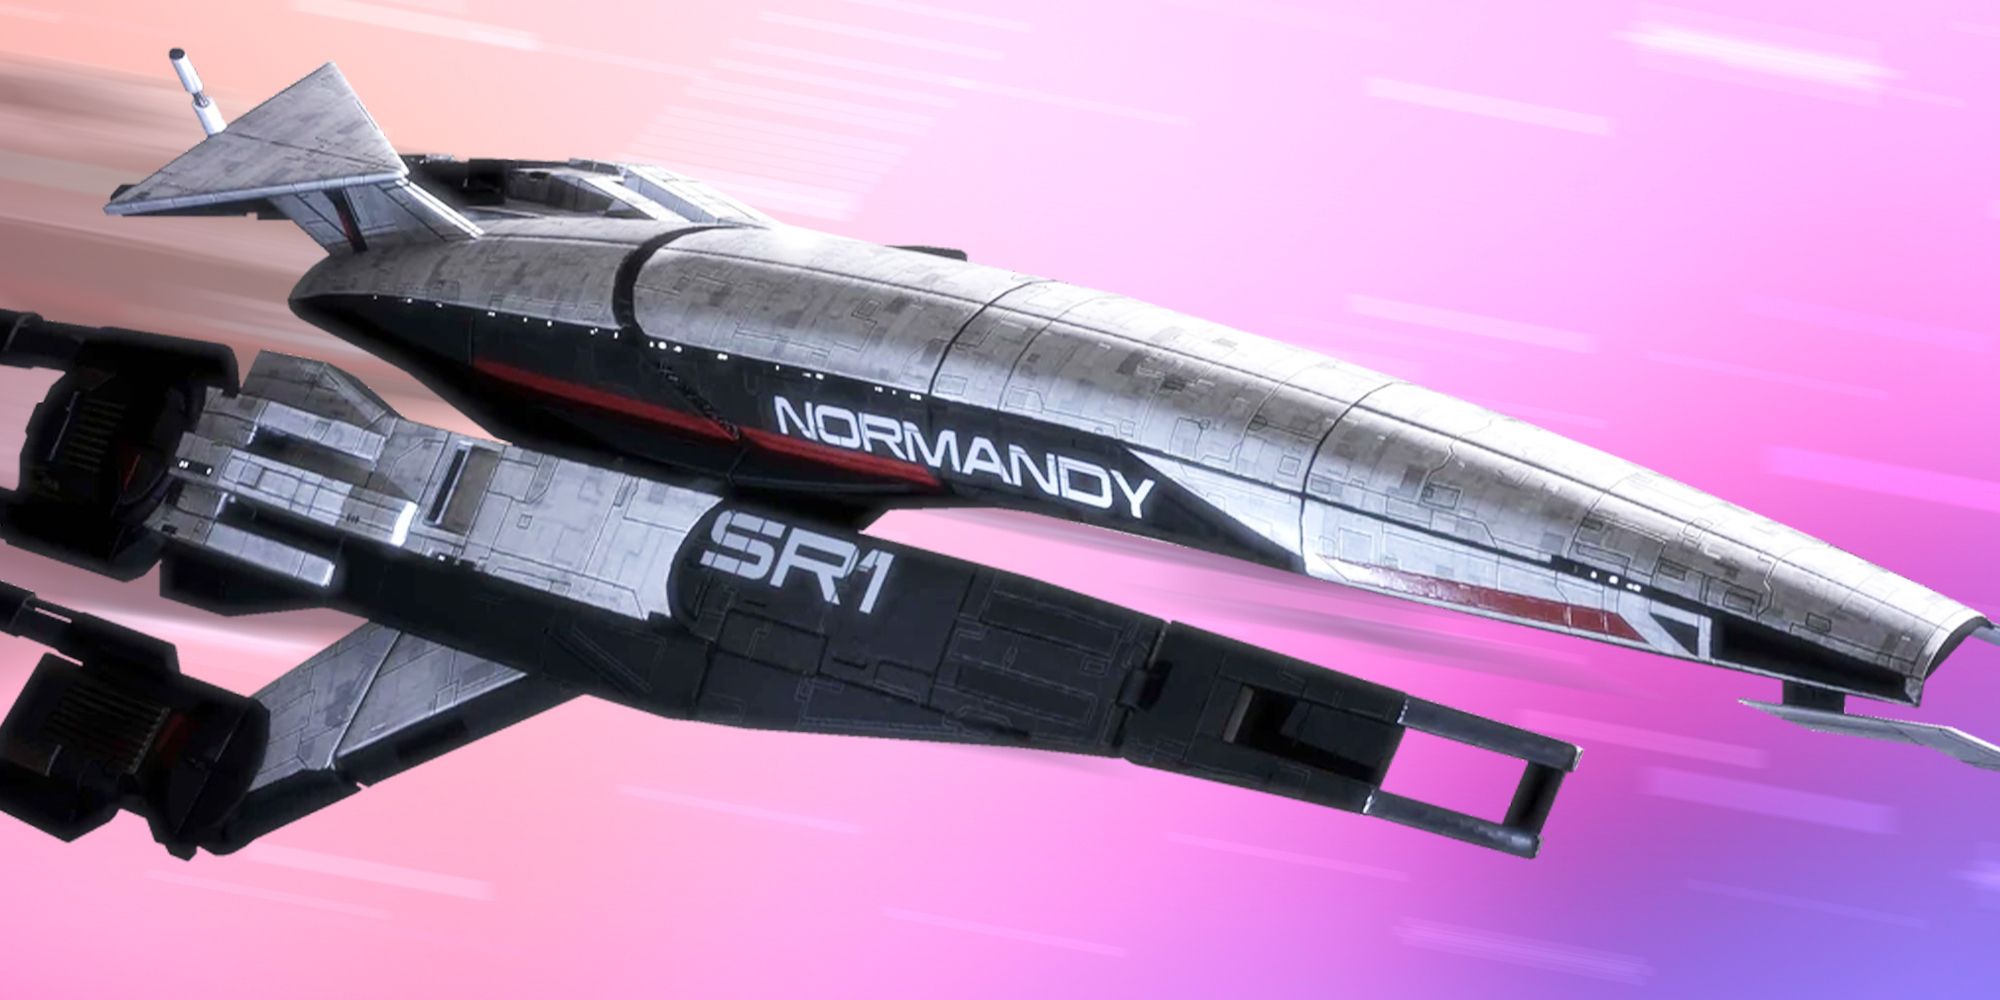 The Normandy from Mass Effect flying with a purple and pink background.